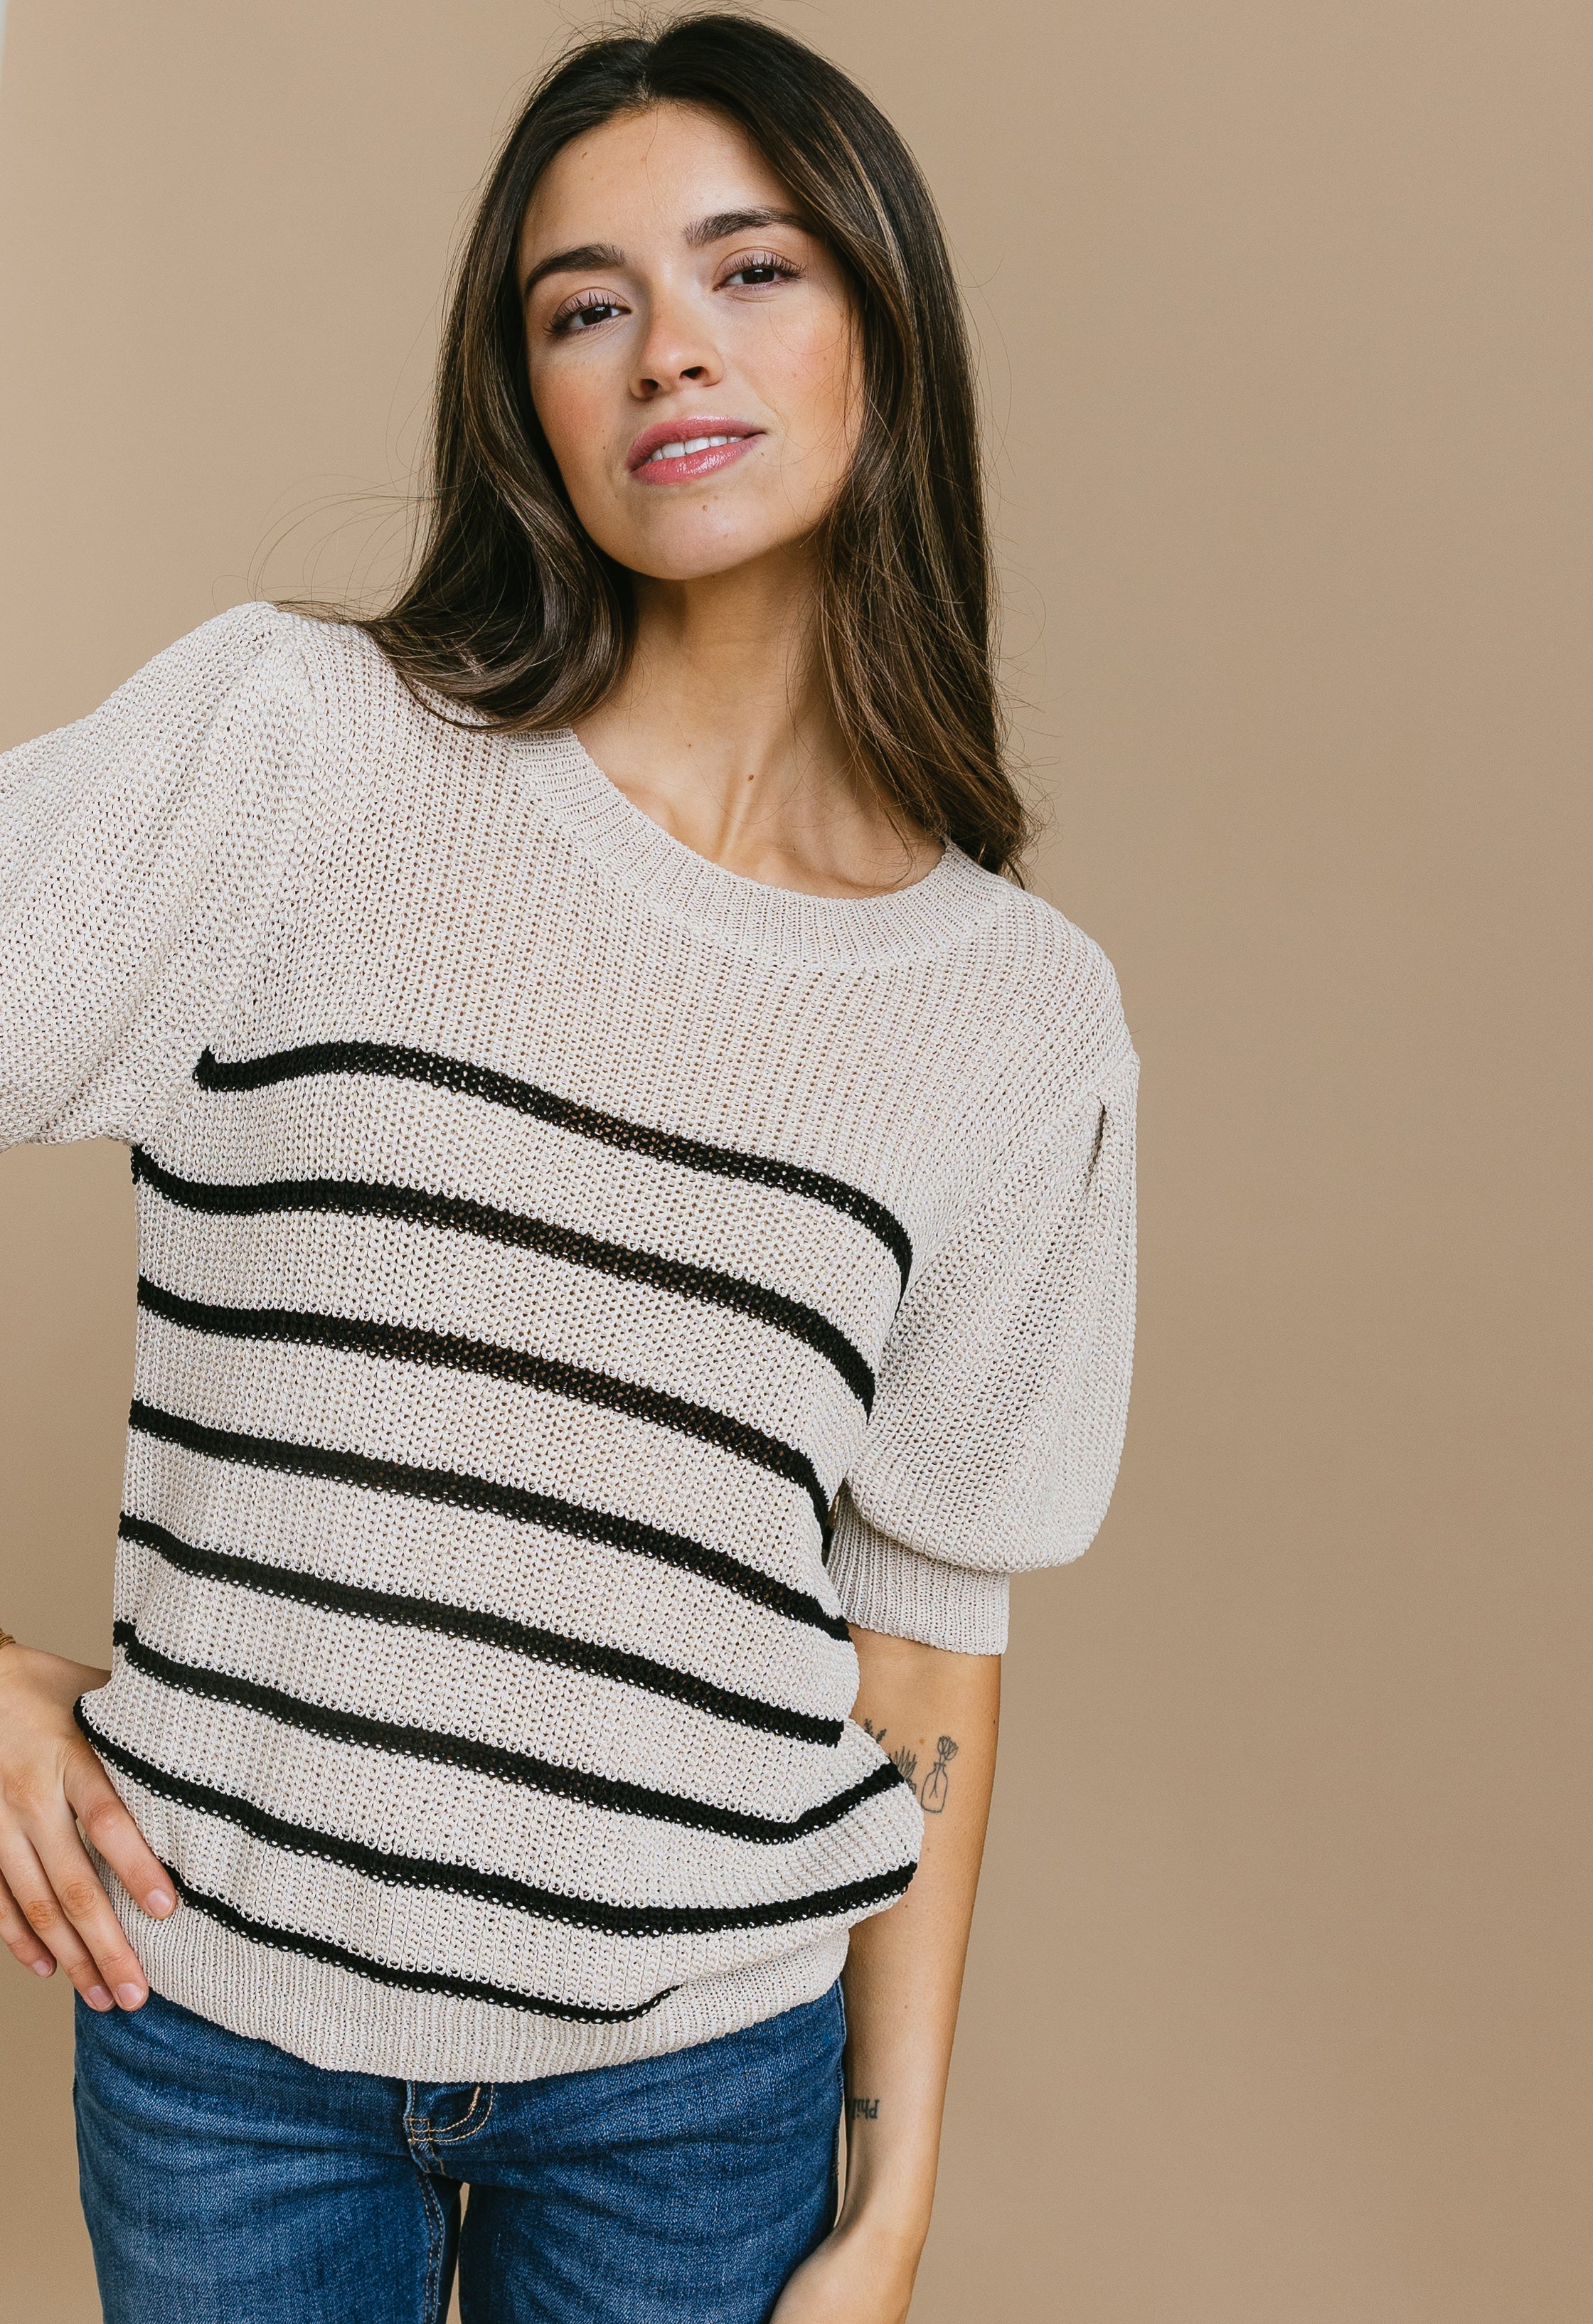 Mark My Words Sweater - TAUPE/BLACK - willows clothing SWEATER